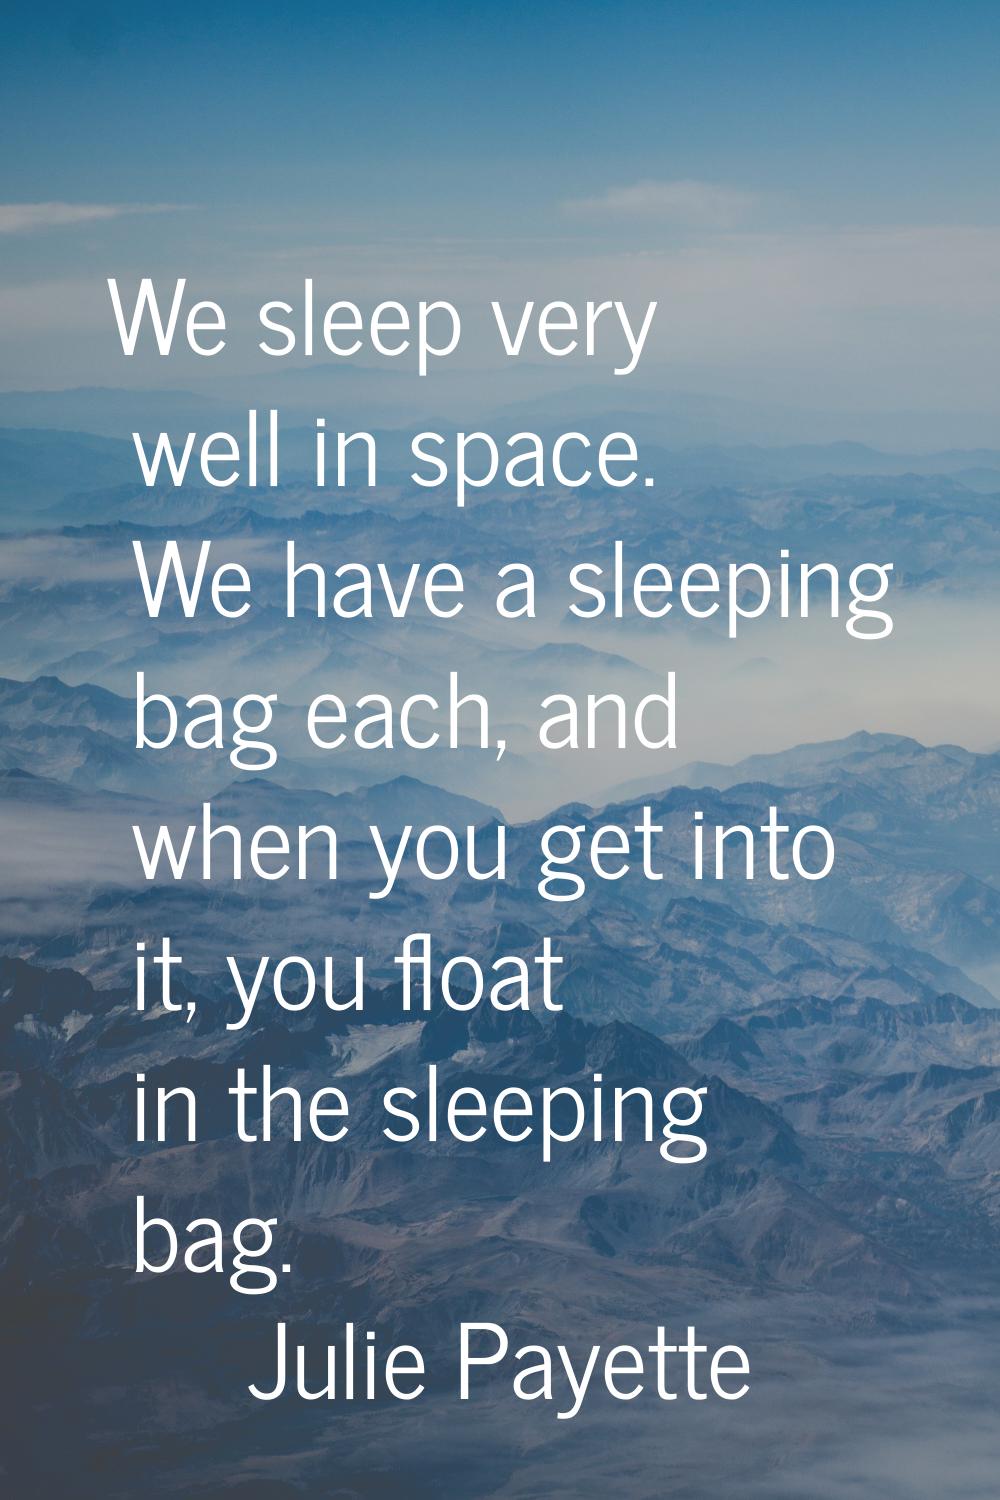 We sleep very well in space. We have a sleeping bag each, and when you get into it, you float in th